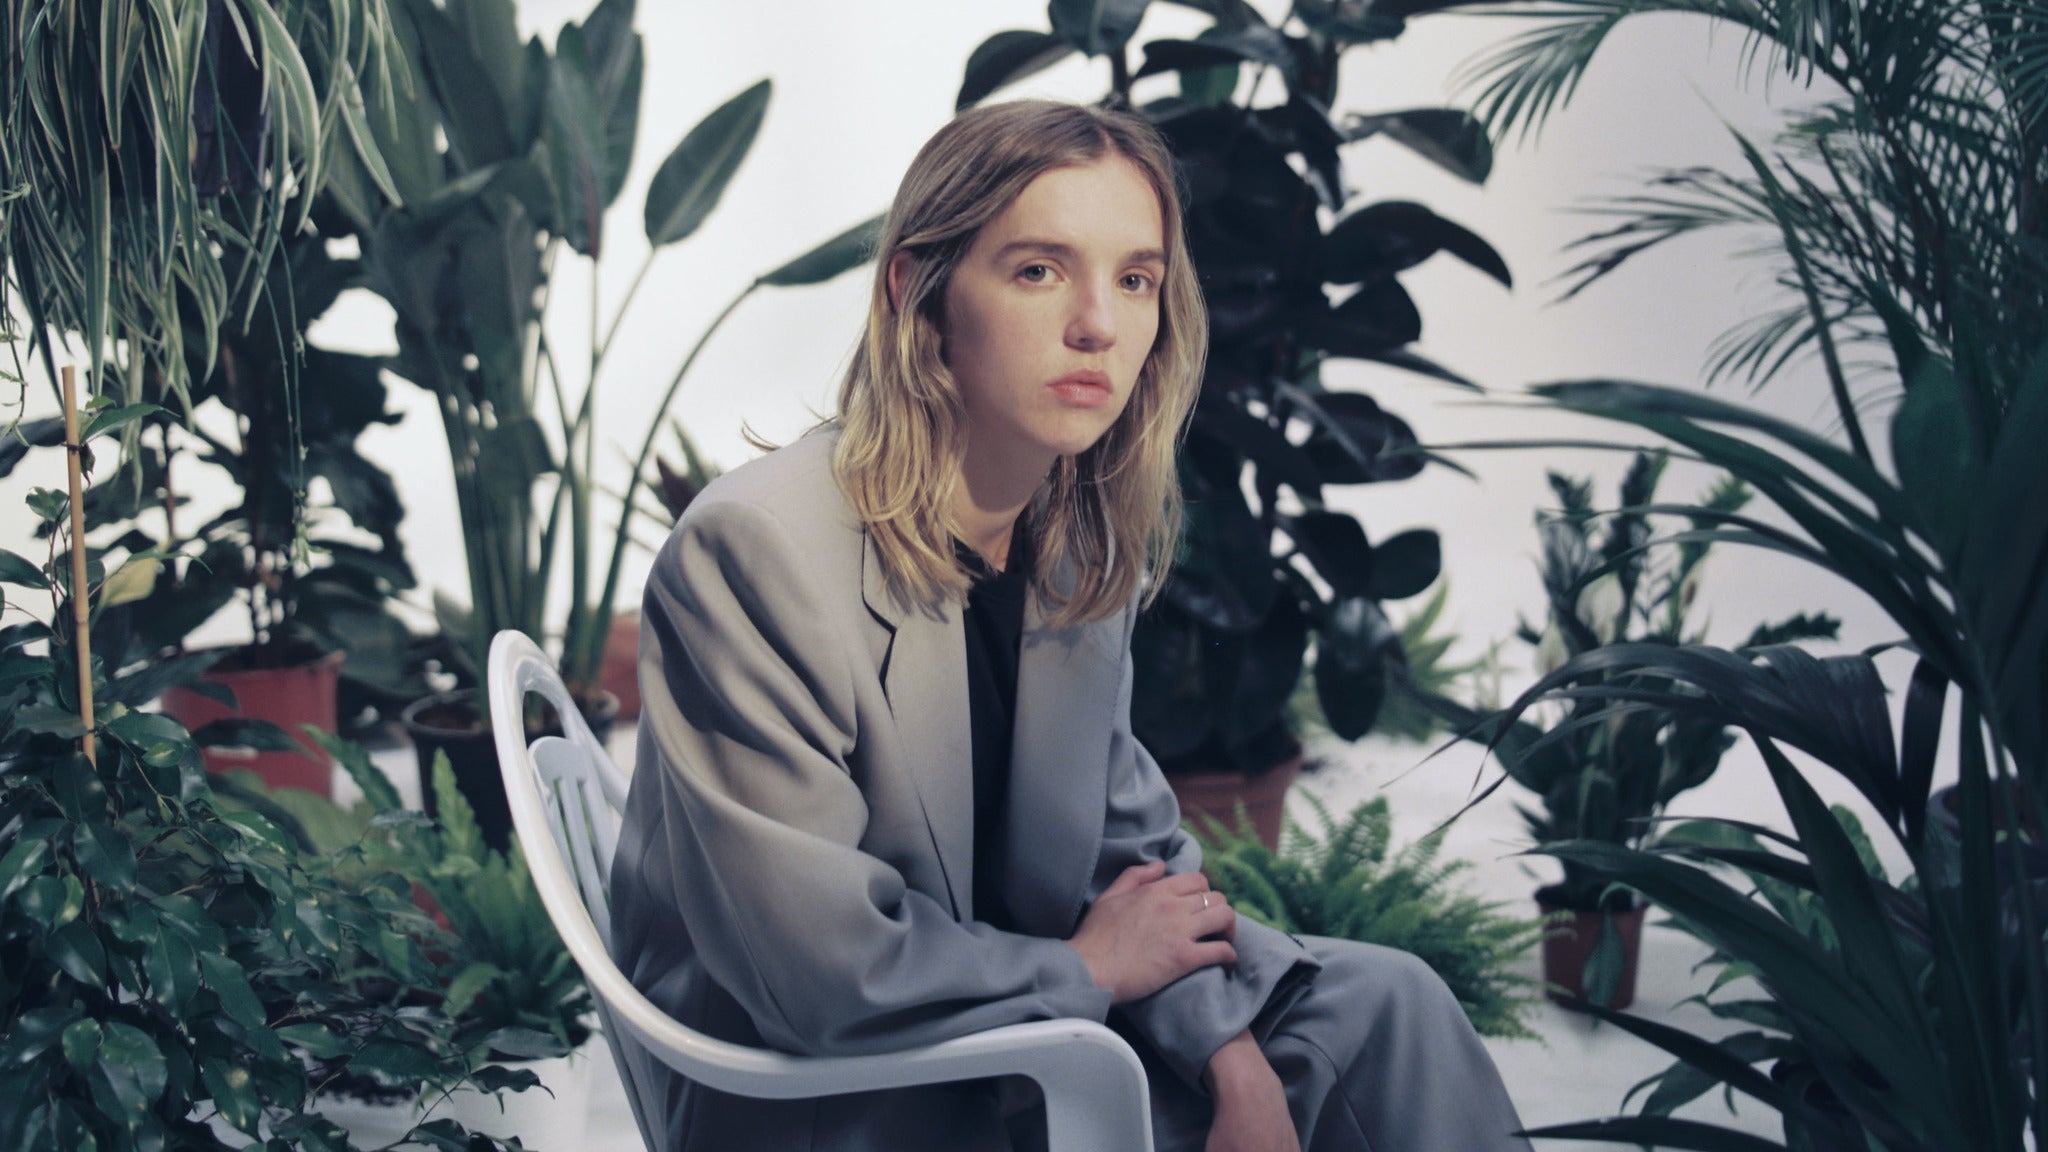 The Japanese House in Nottingham promo photo for Spotify presale offer code